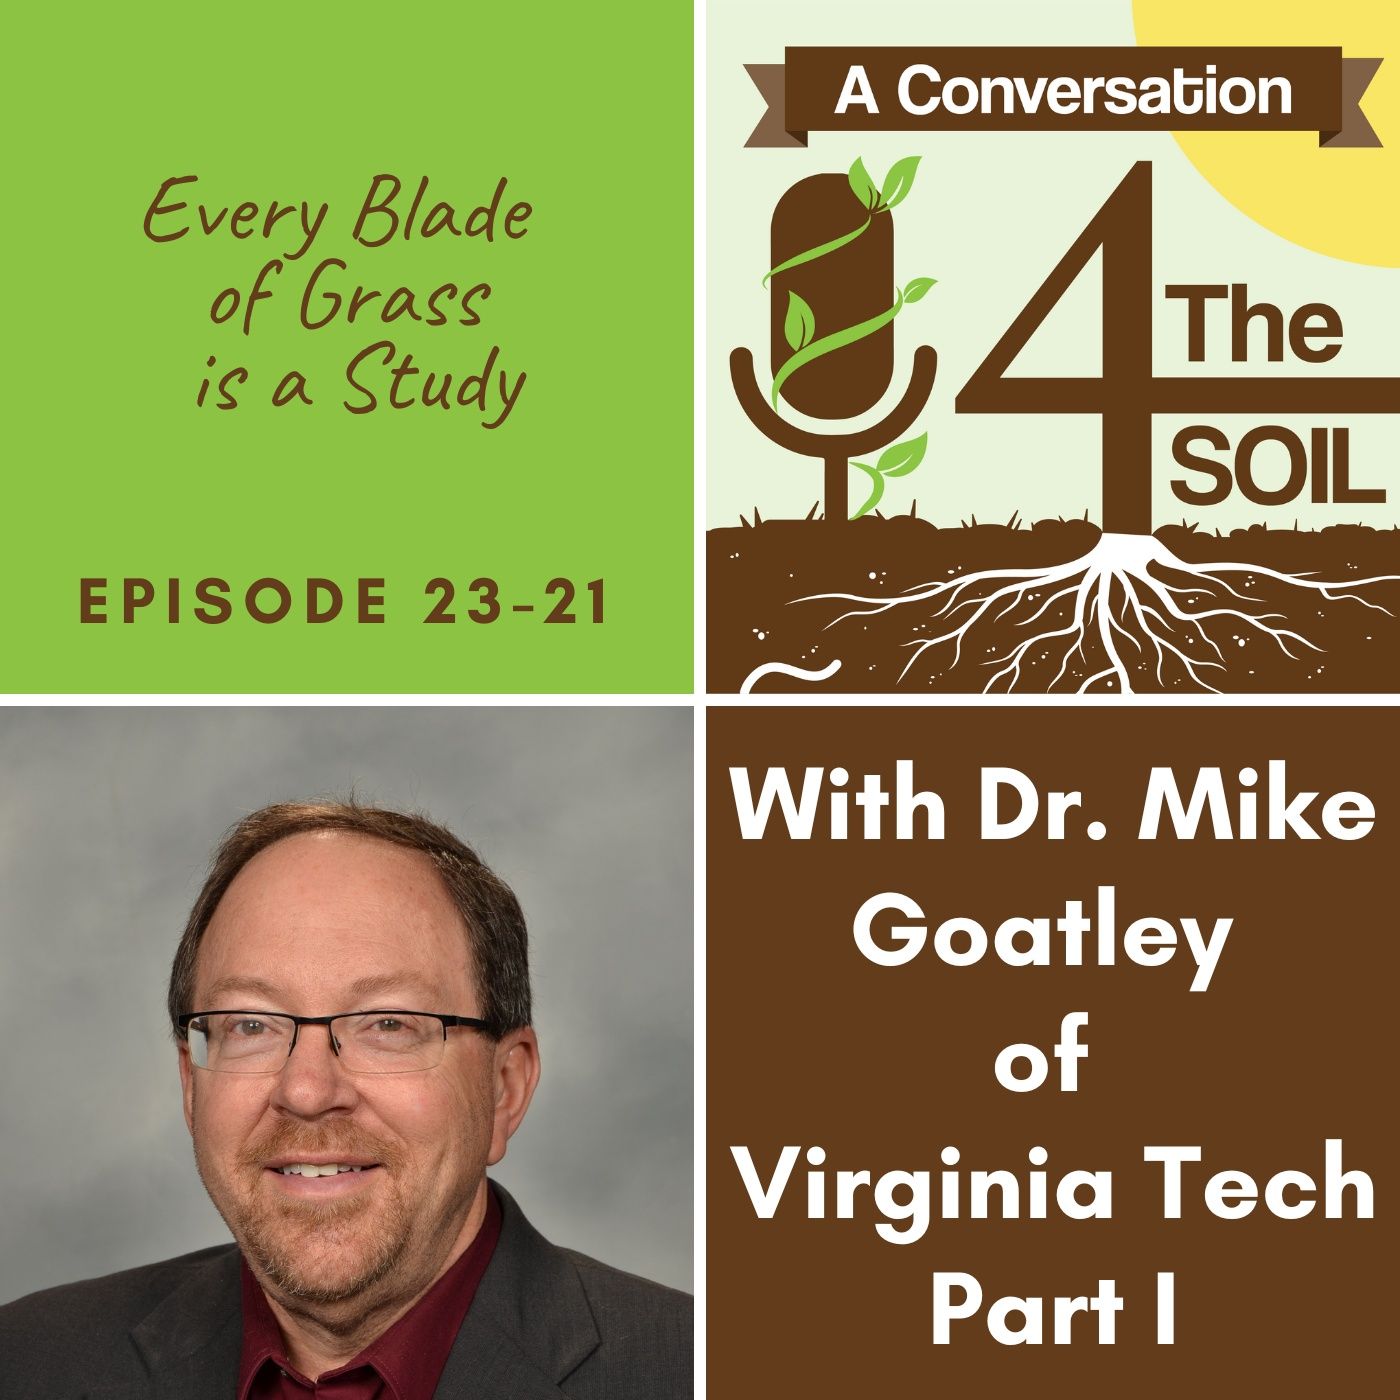 Episode 23 - 21: Every Blade of Grass is a Study with Dr. Mike Goatley of Virginia Tech Part I